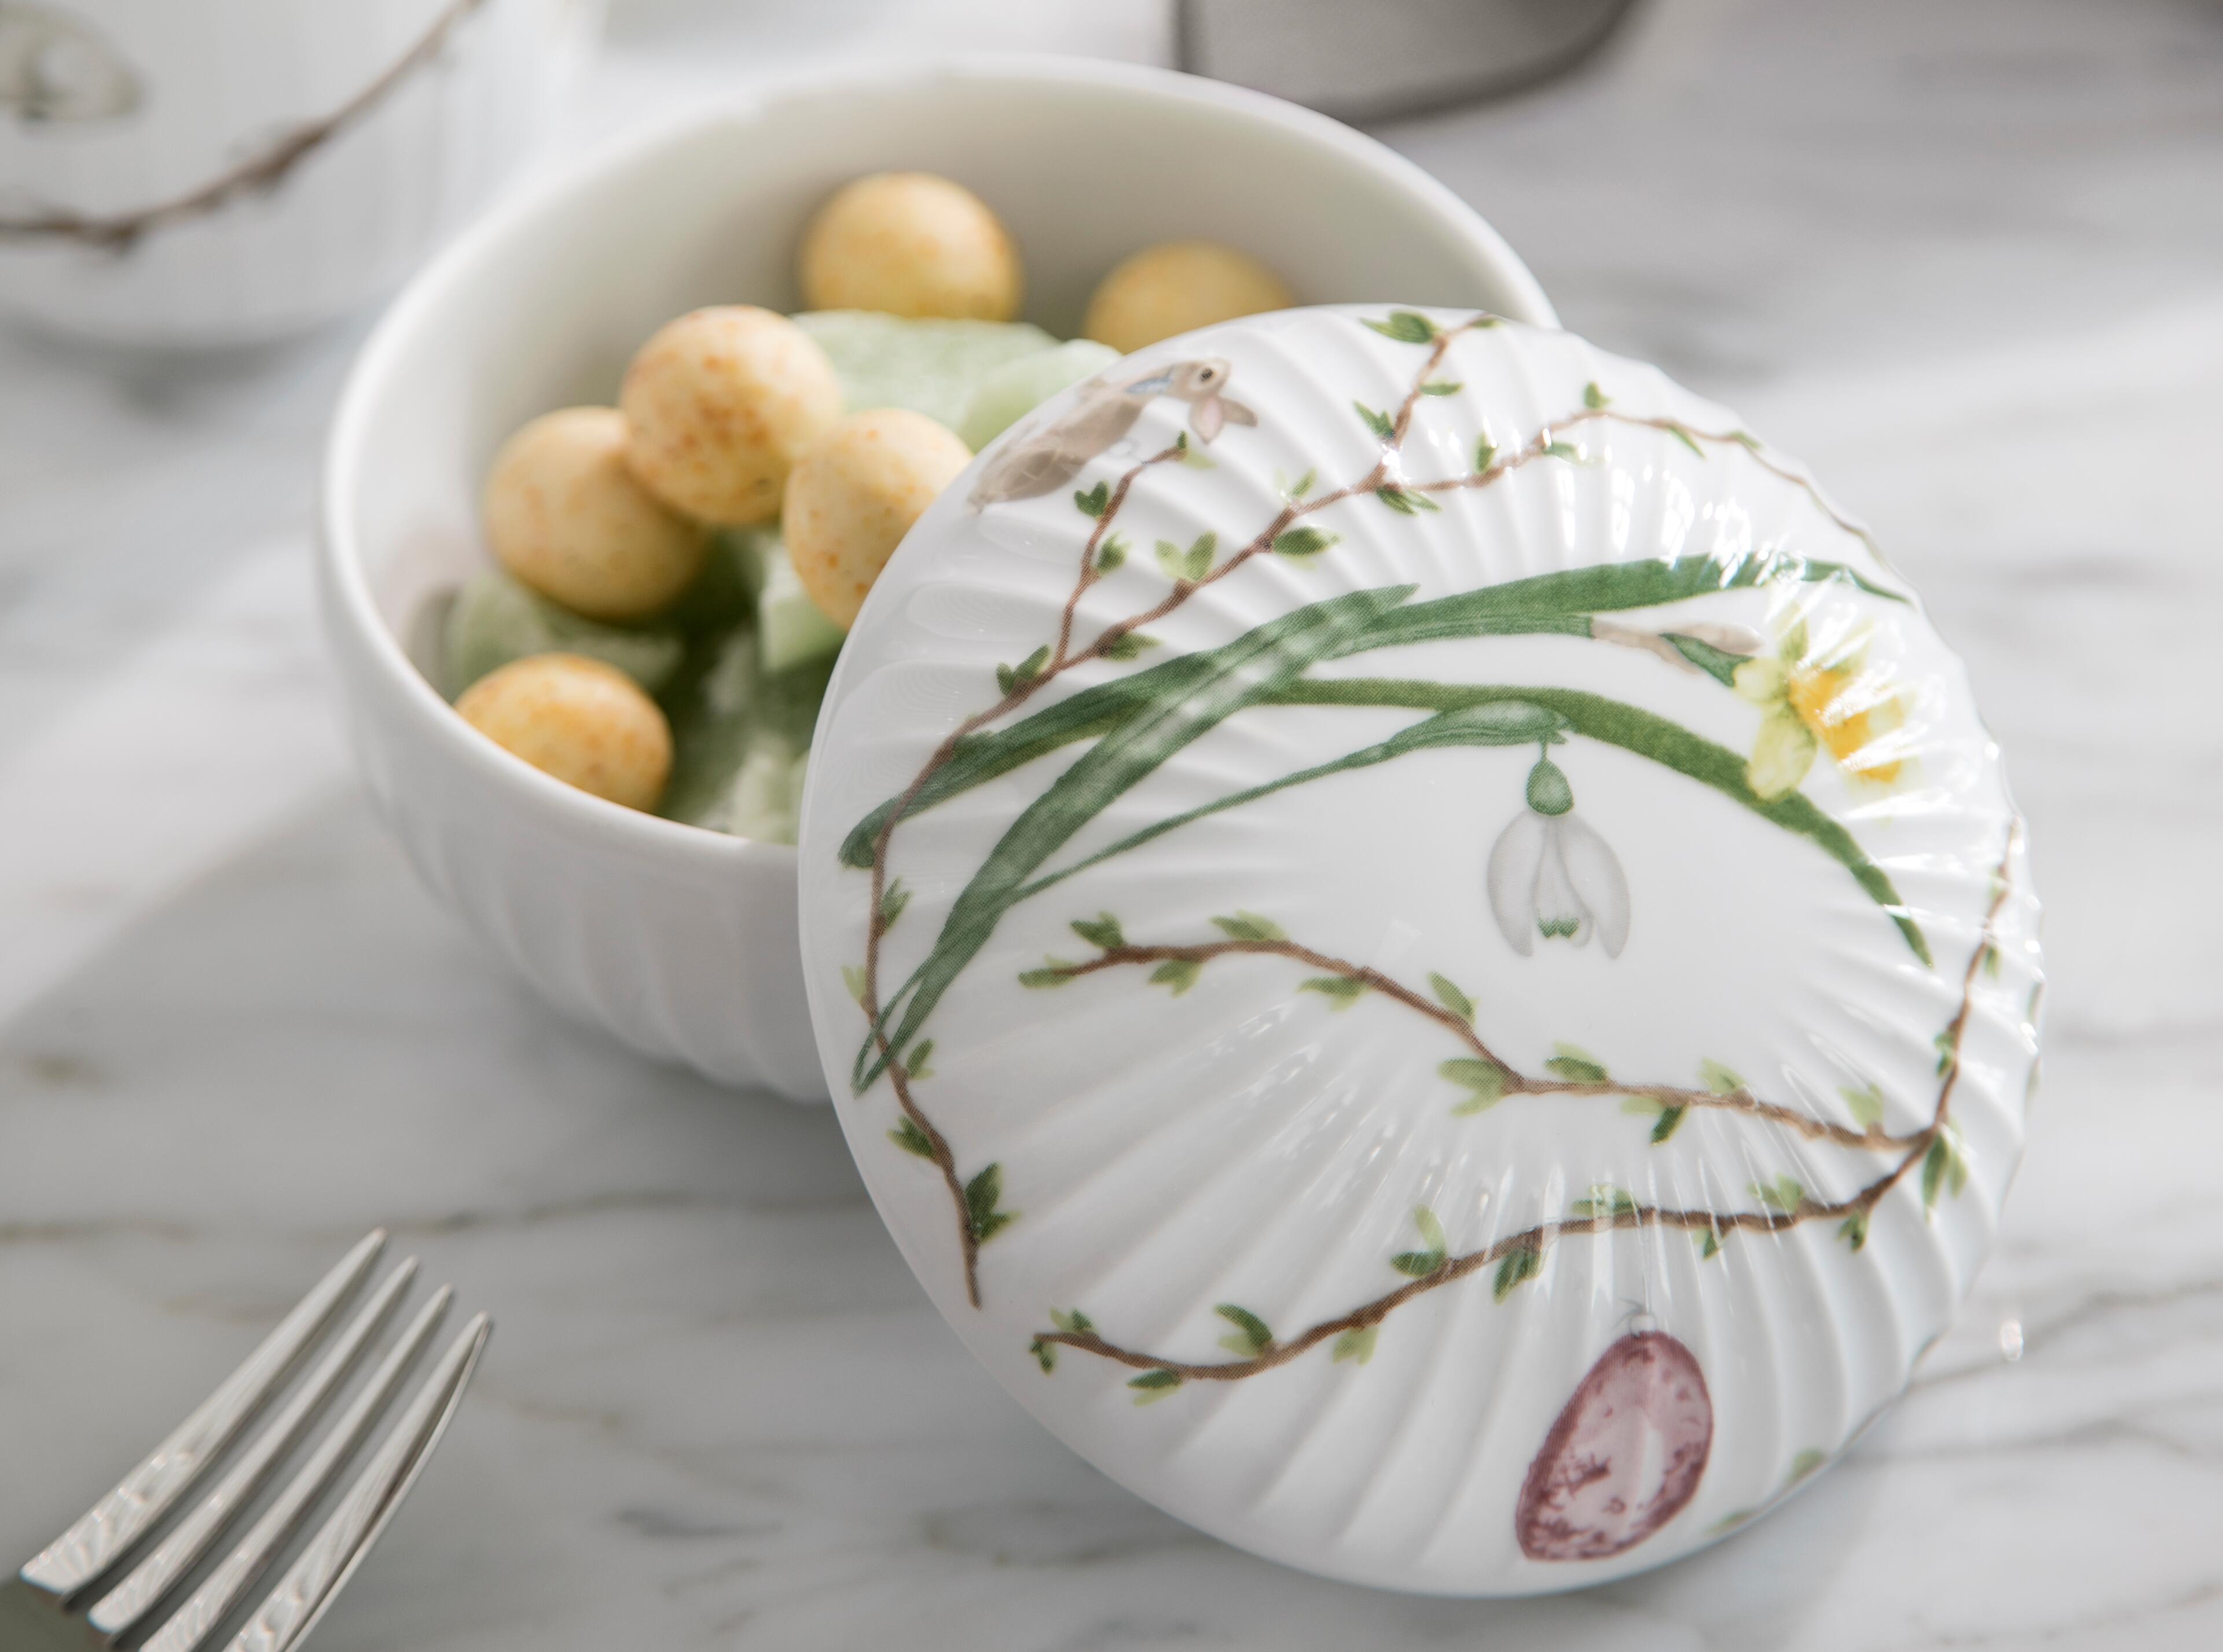 Bonbonniere from Kähler design. White bonbonniere in porcelain and with painted pattern